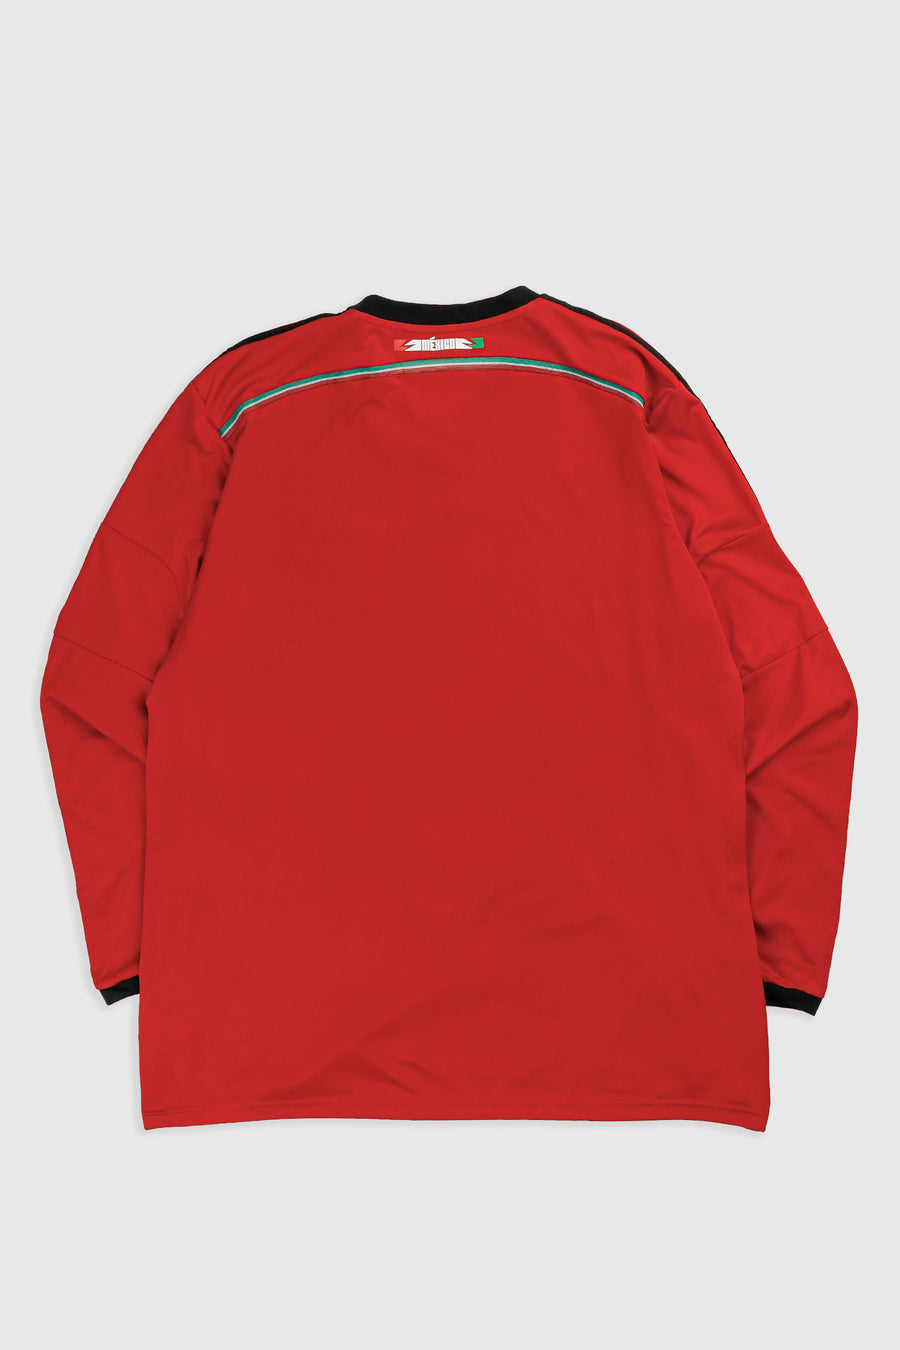 Vintage Mexico Soccer Long Sleeve Jersey - XXL